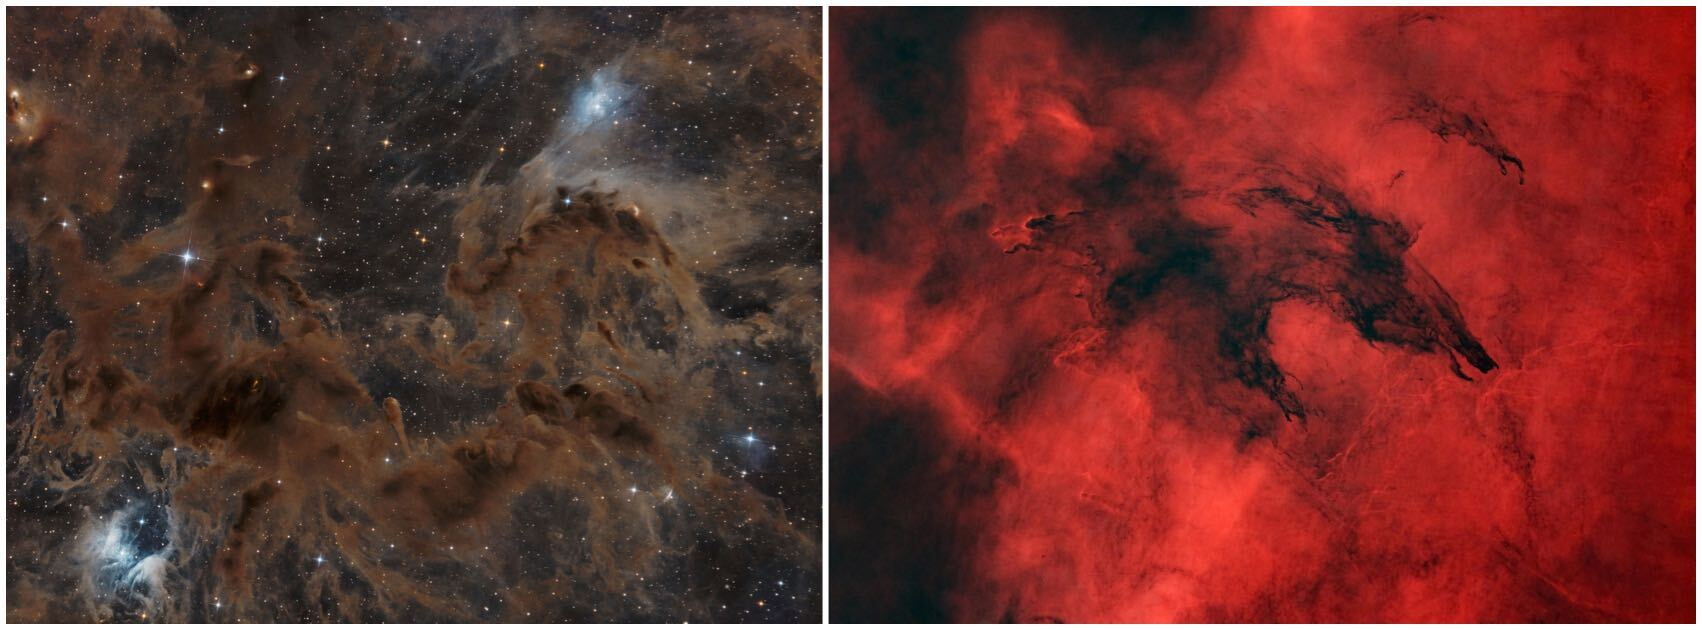 pictures of nebulas, one primarily brown, the other red.